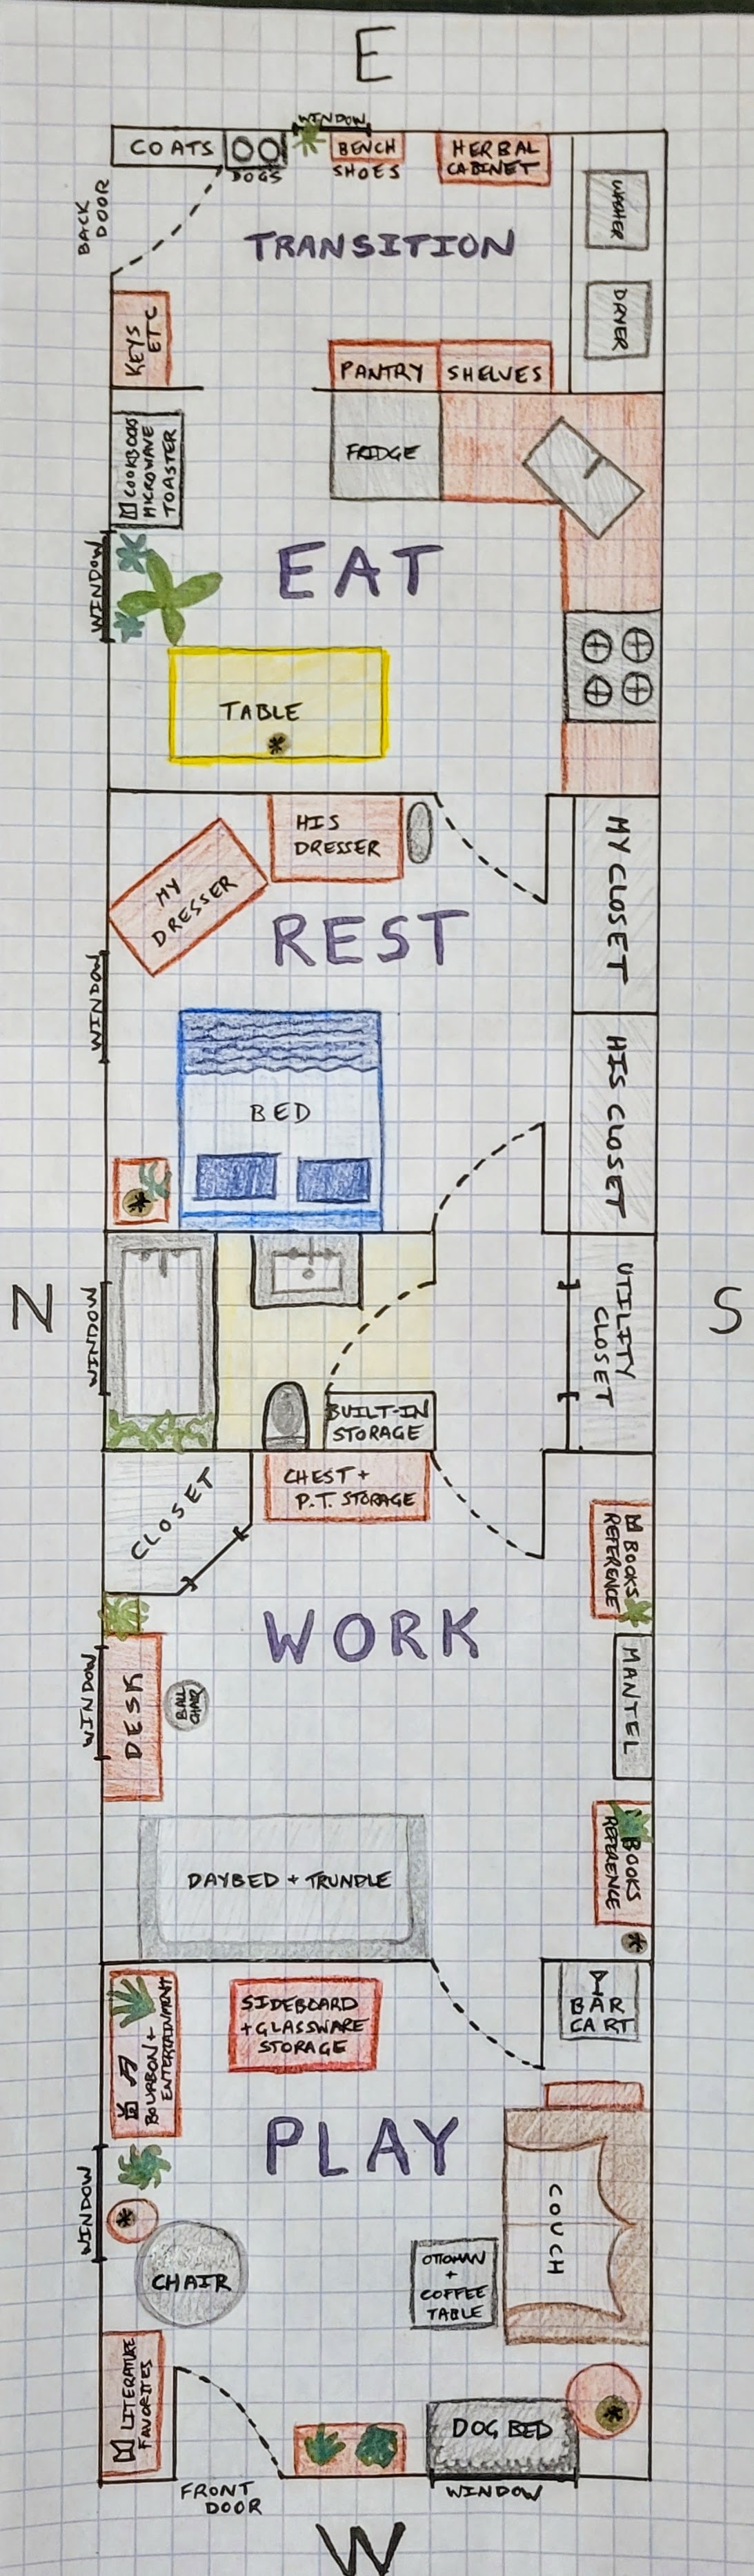 Image is a hand-drawn floorplan of a railroad style apartment on graph paper, with rooms labeled Transition, Eat, Rest, Work, and Play.